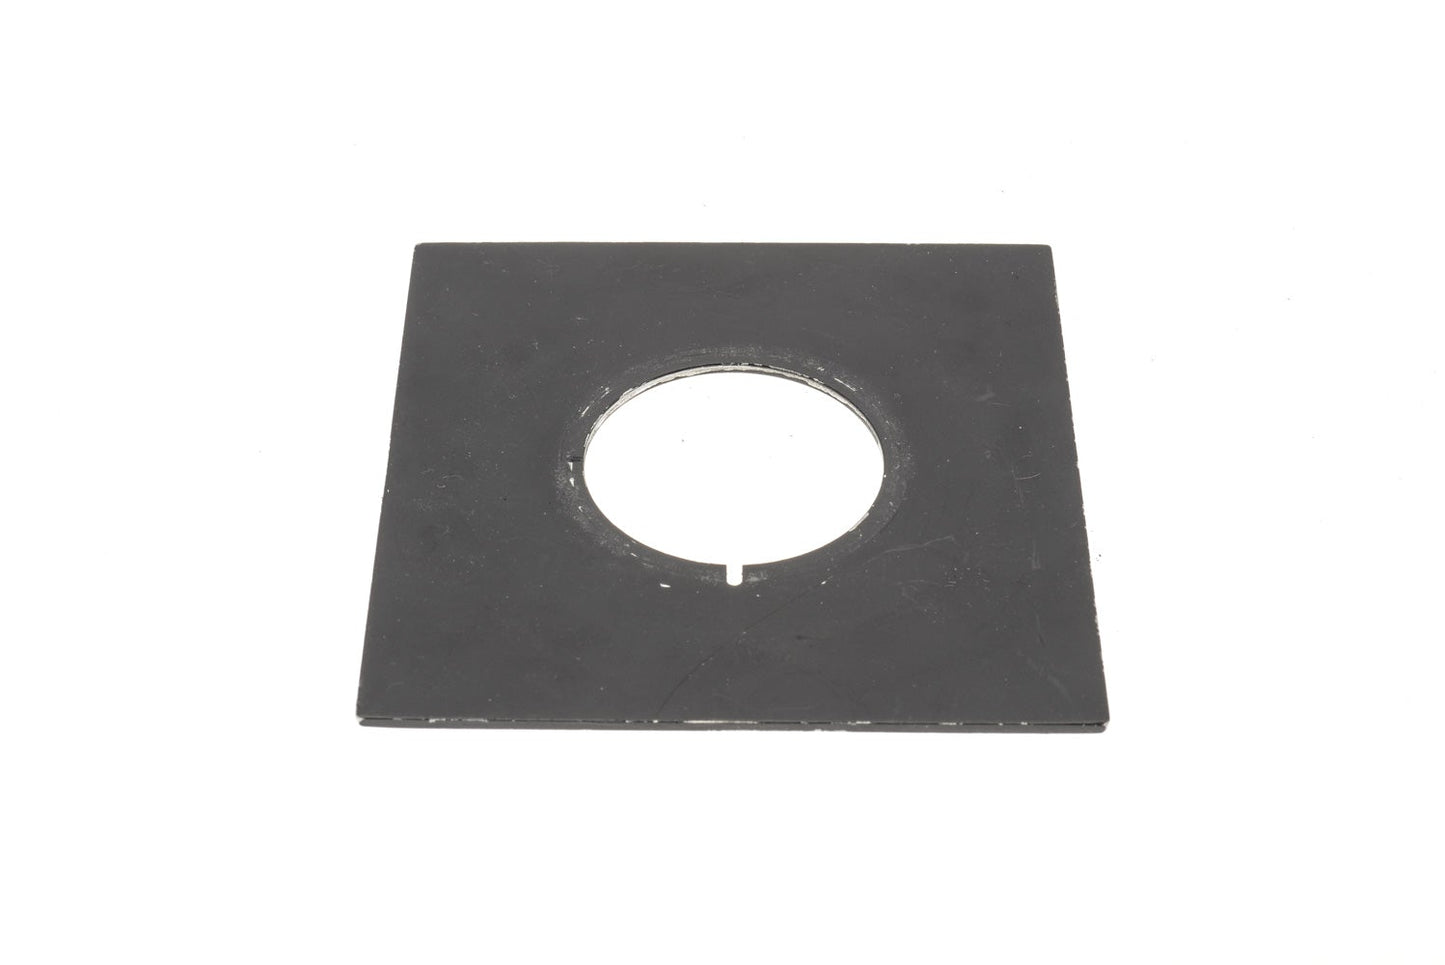 Other #1 Lens Board 99mm x 96mm - Accessory